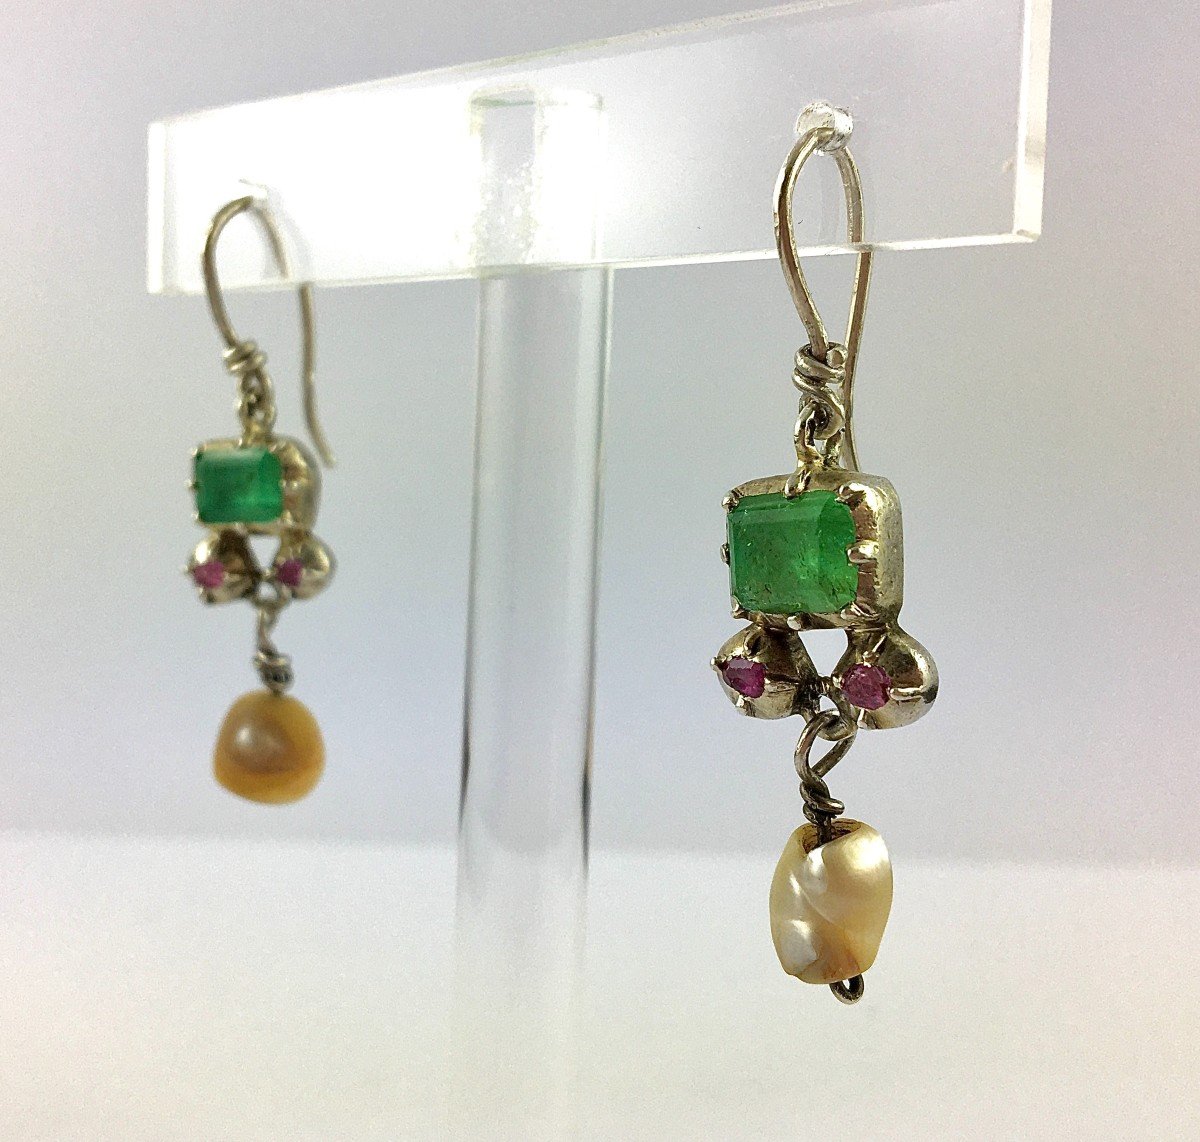 Berber Ethnic Earrings Dangling Emeralds, Rubies And Baroque Pearls On Silver-photo-4